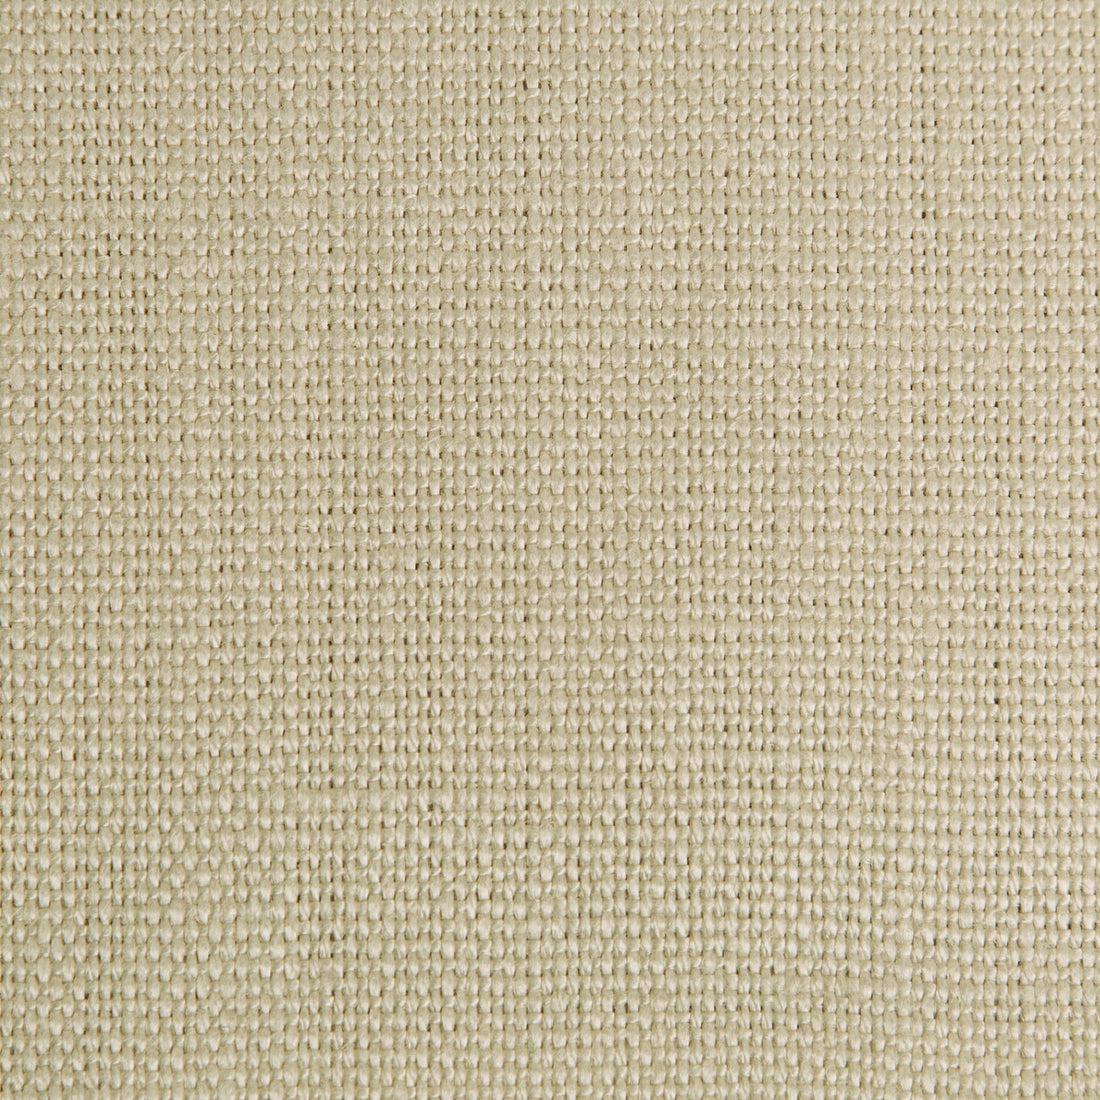 Hampton Linen fabric in marshmallow color - pattern 2012171.1606.0 - by Lee Jofa in the Colour Complements II collection